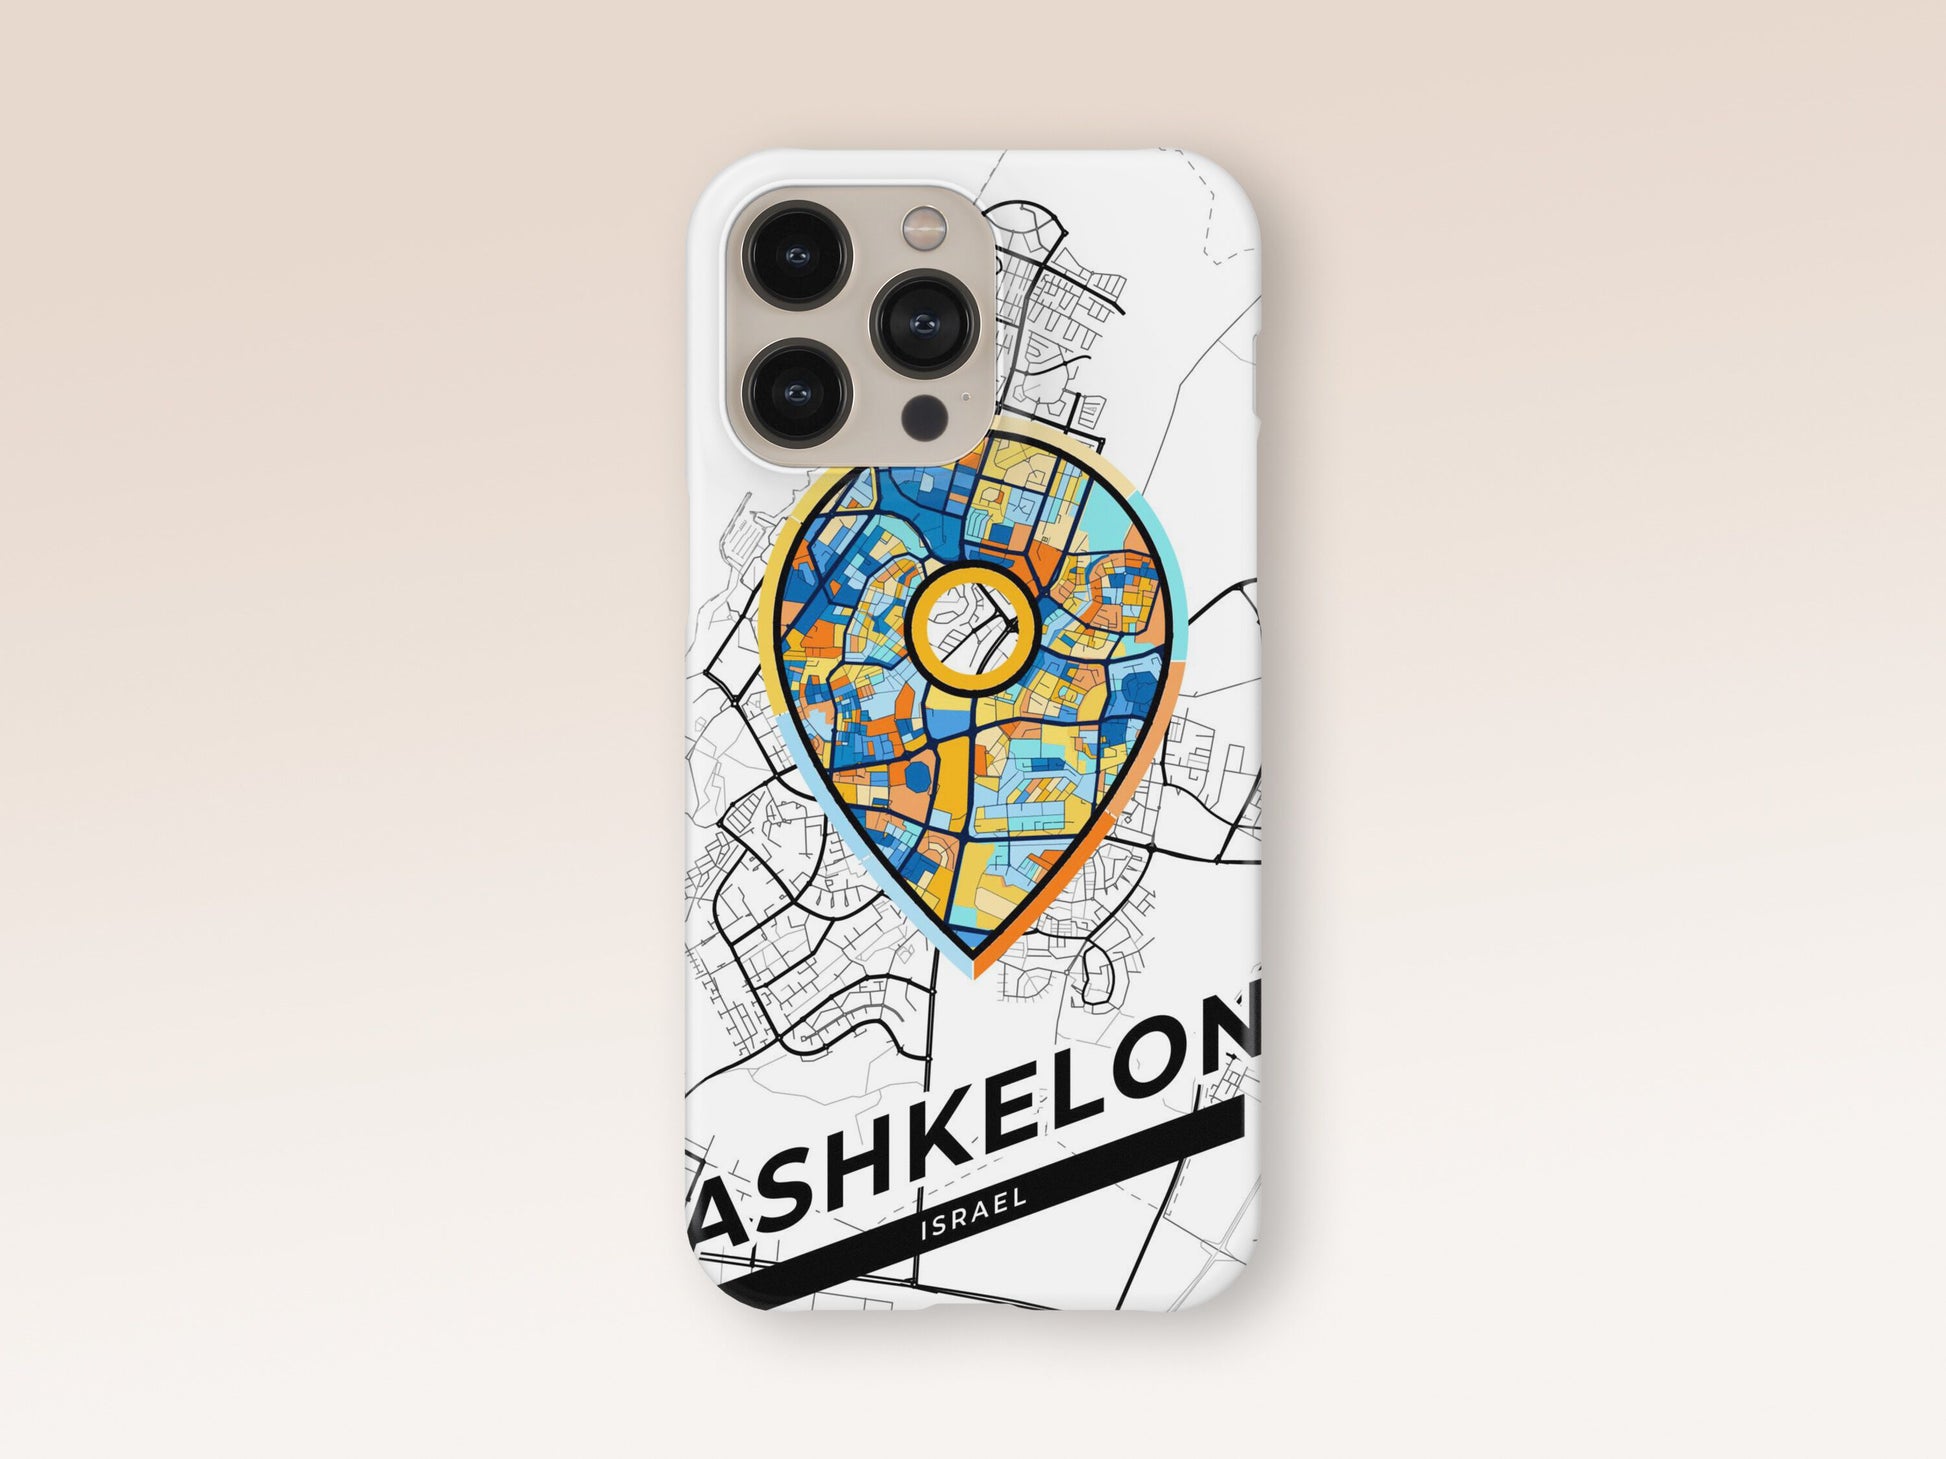 Ashkelon Israel slim phone case with colorful icon. Birthday, wedding or housewarming gift. Couple match cases. 1